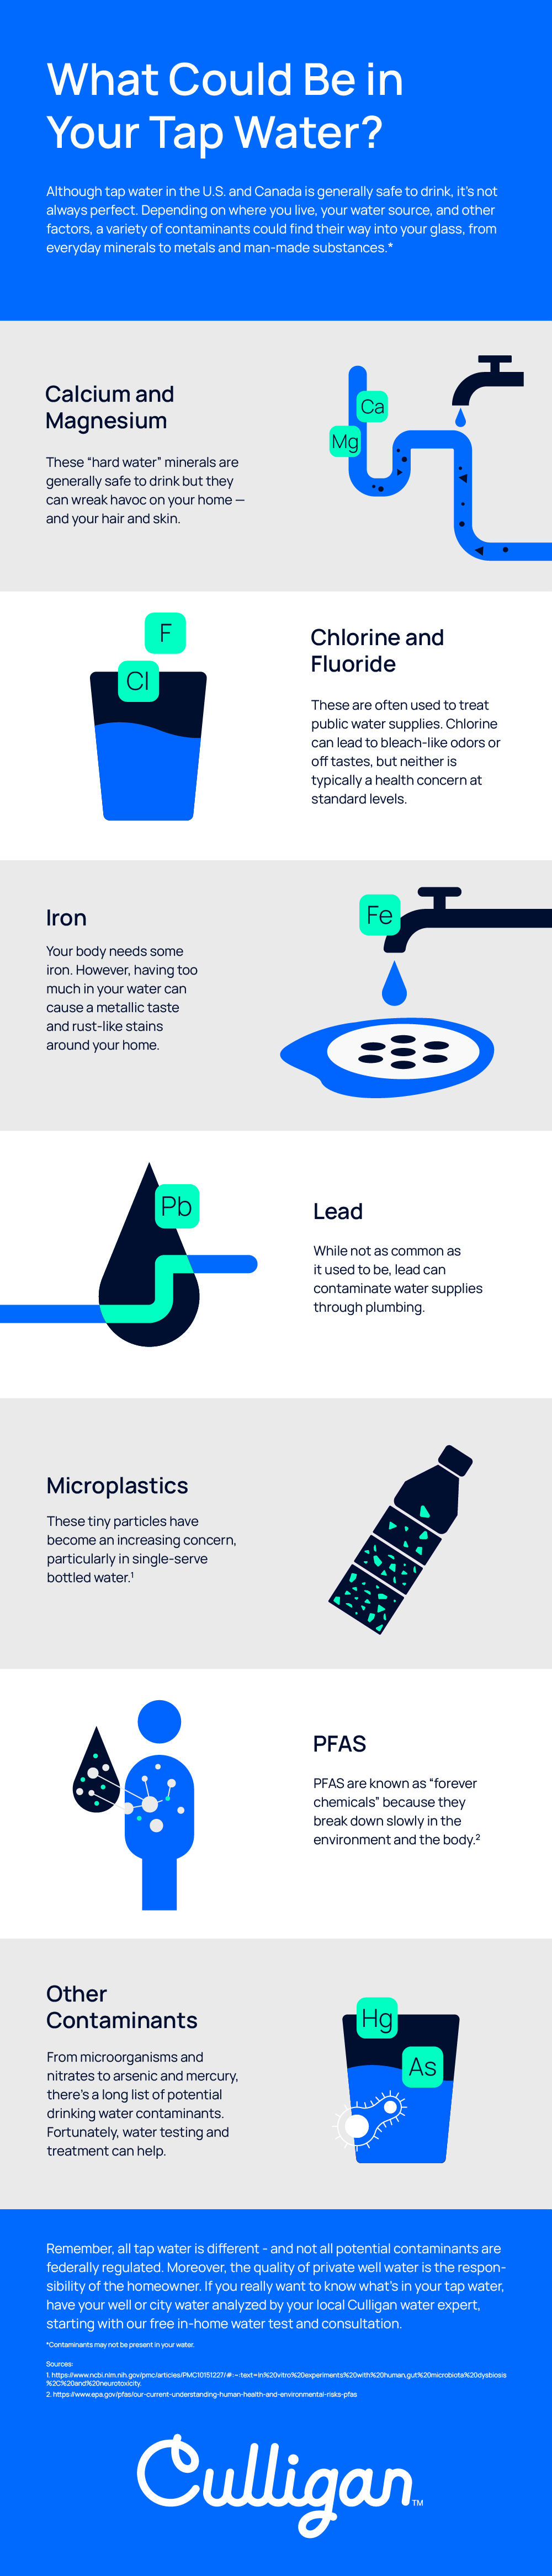 Infographic with info on what potential contaminants may be in tap water